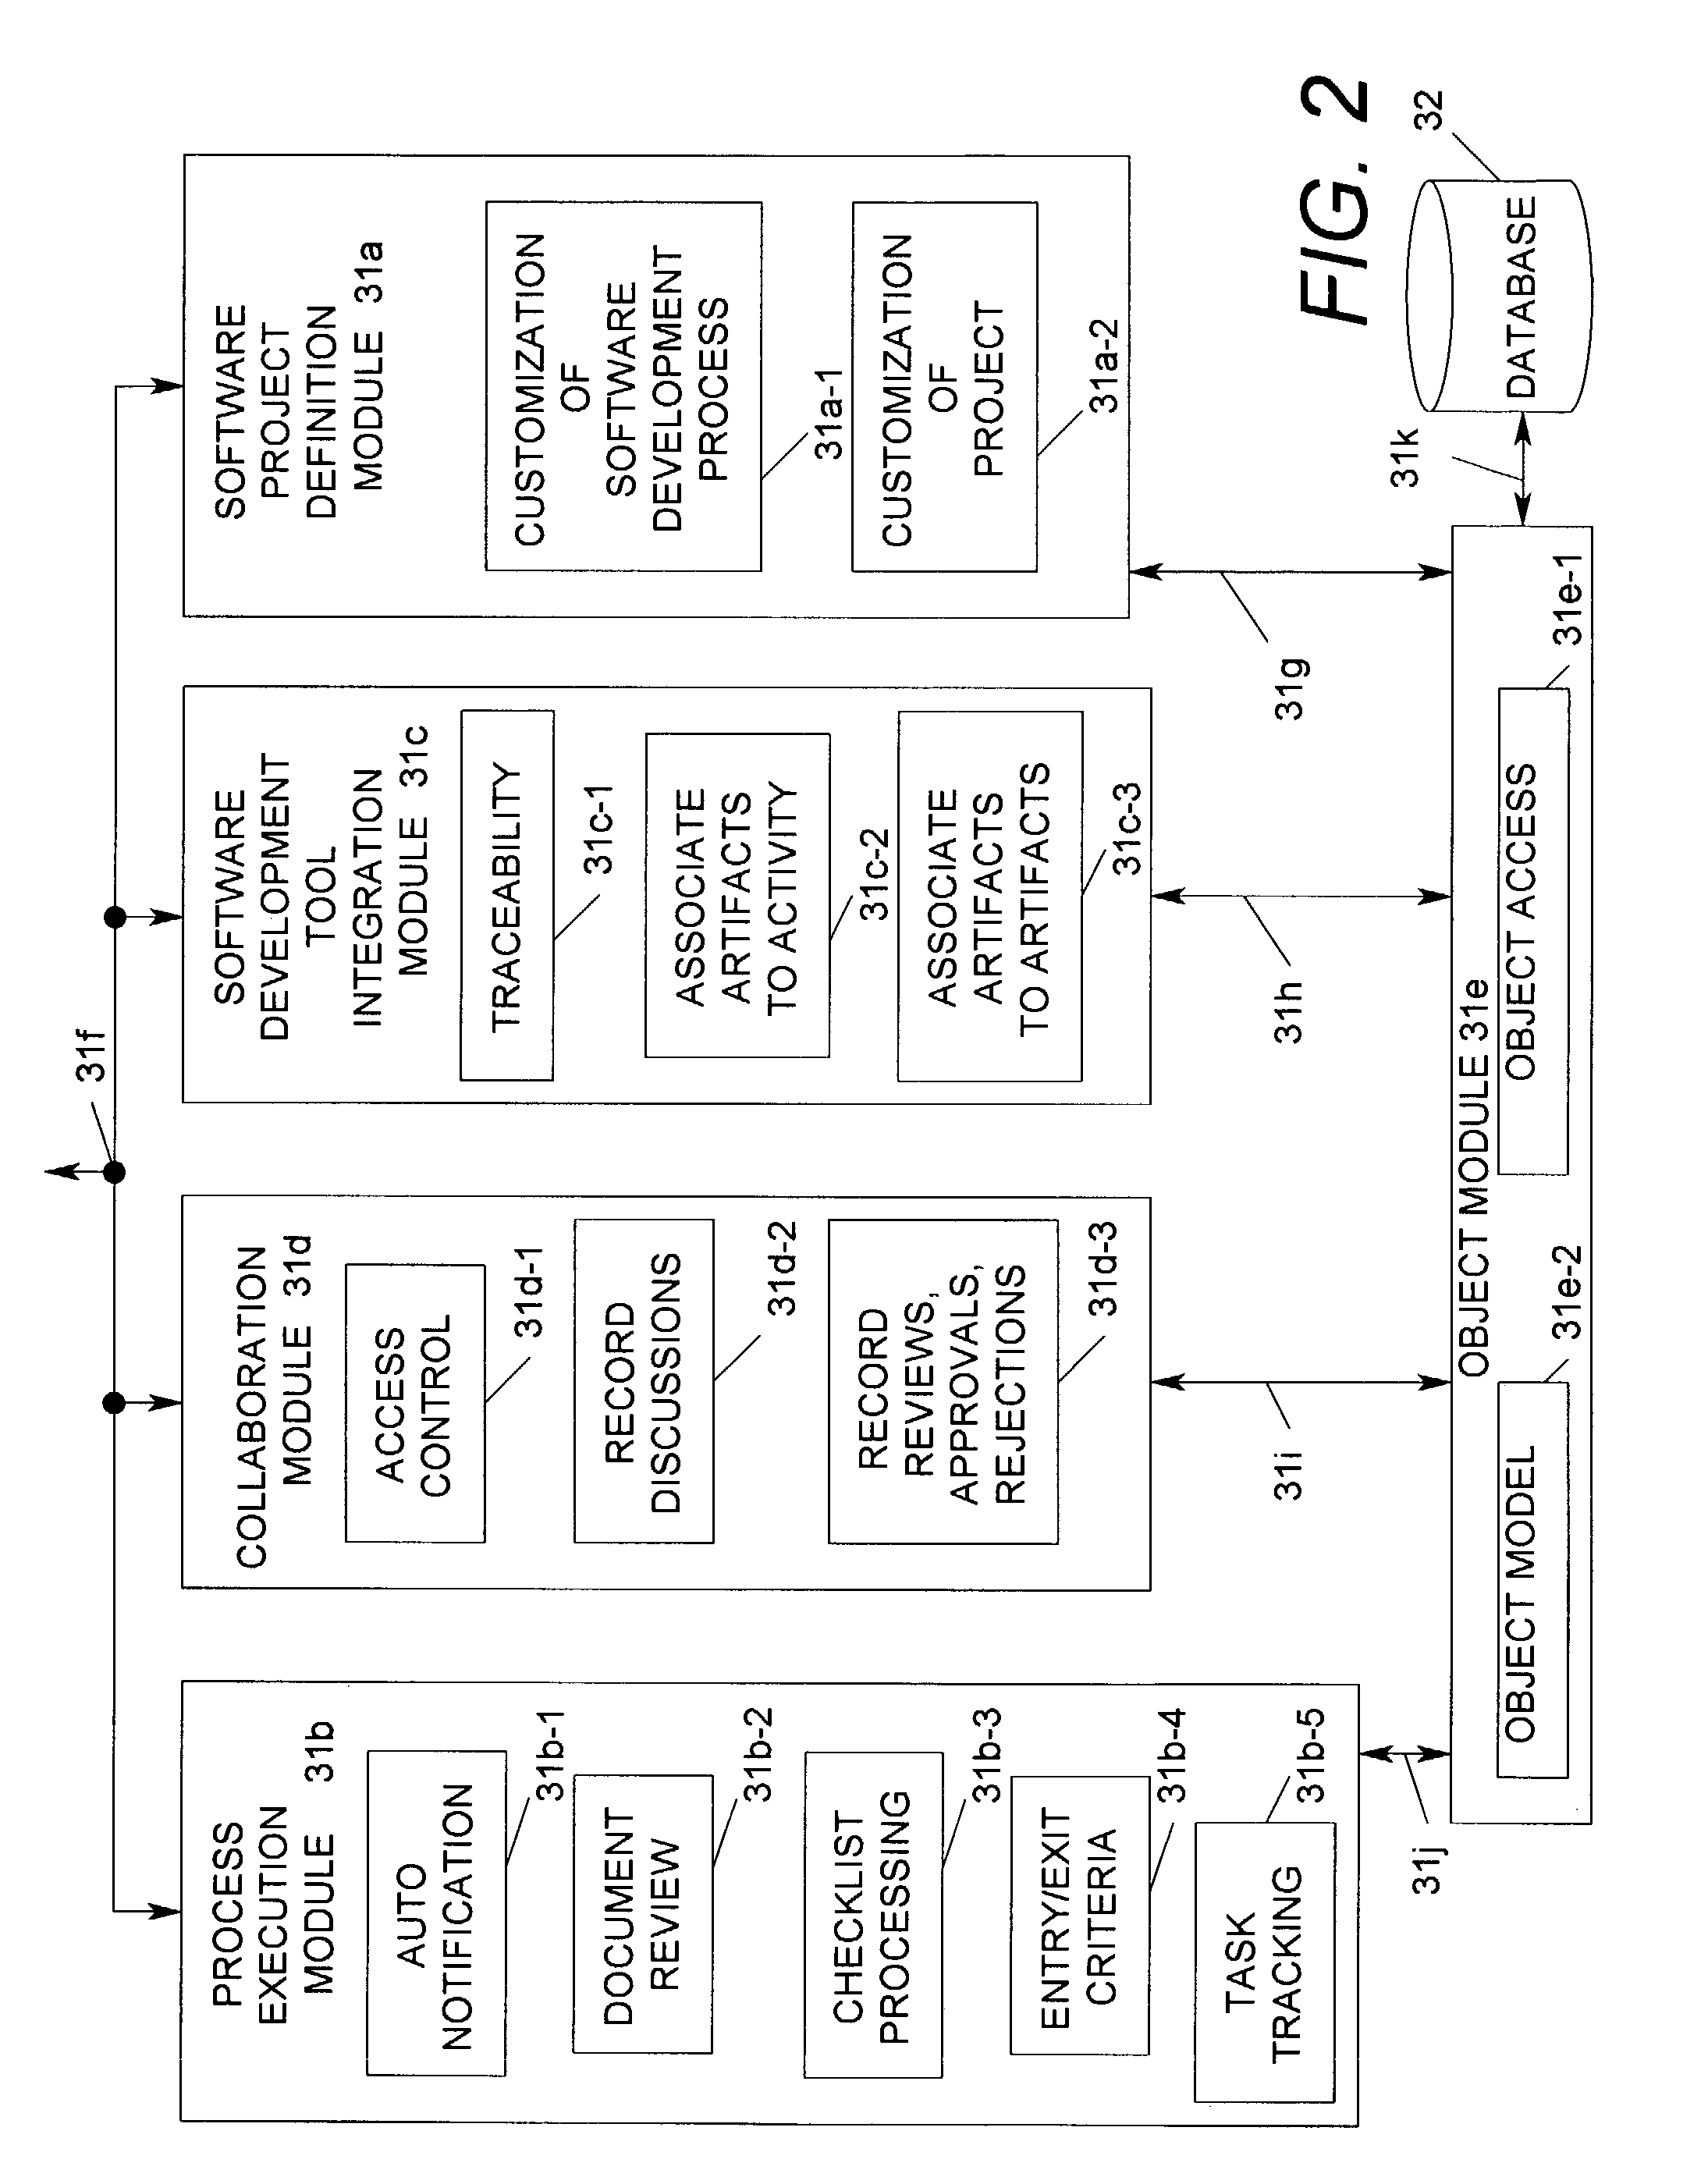 Computer program having an object module and a software development tool integration module which automatically interlink artifacts generated in different phases of a software project